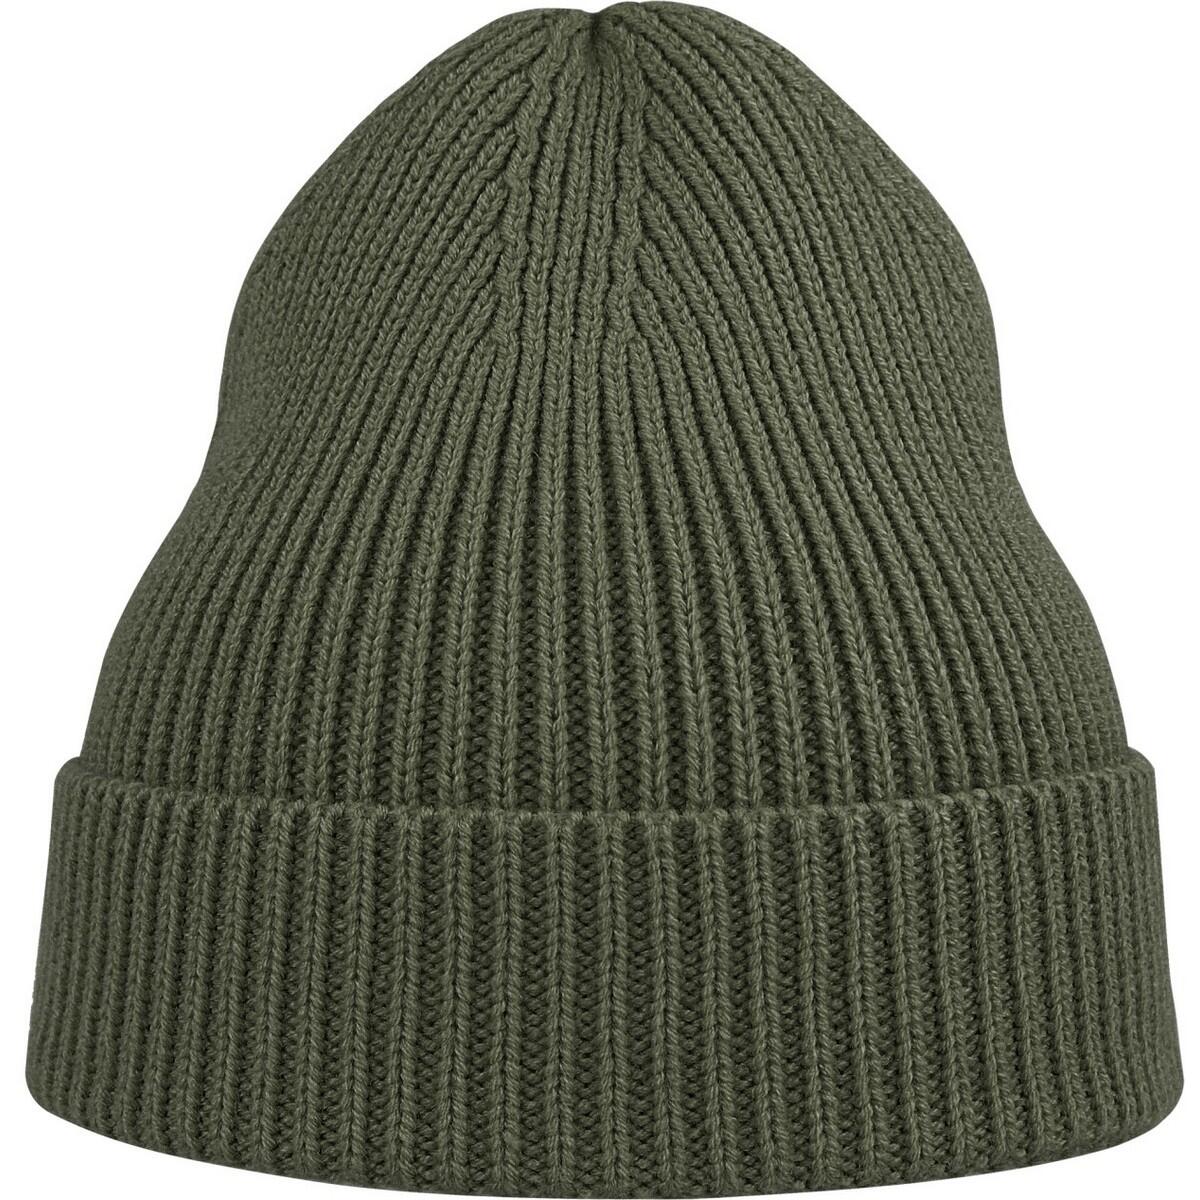 ATLANTIS Unisex Adult Andy Recycled Polyester Beanie (Olive)